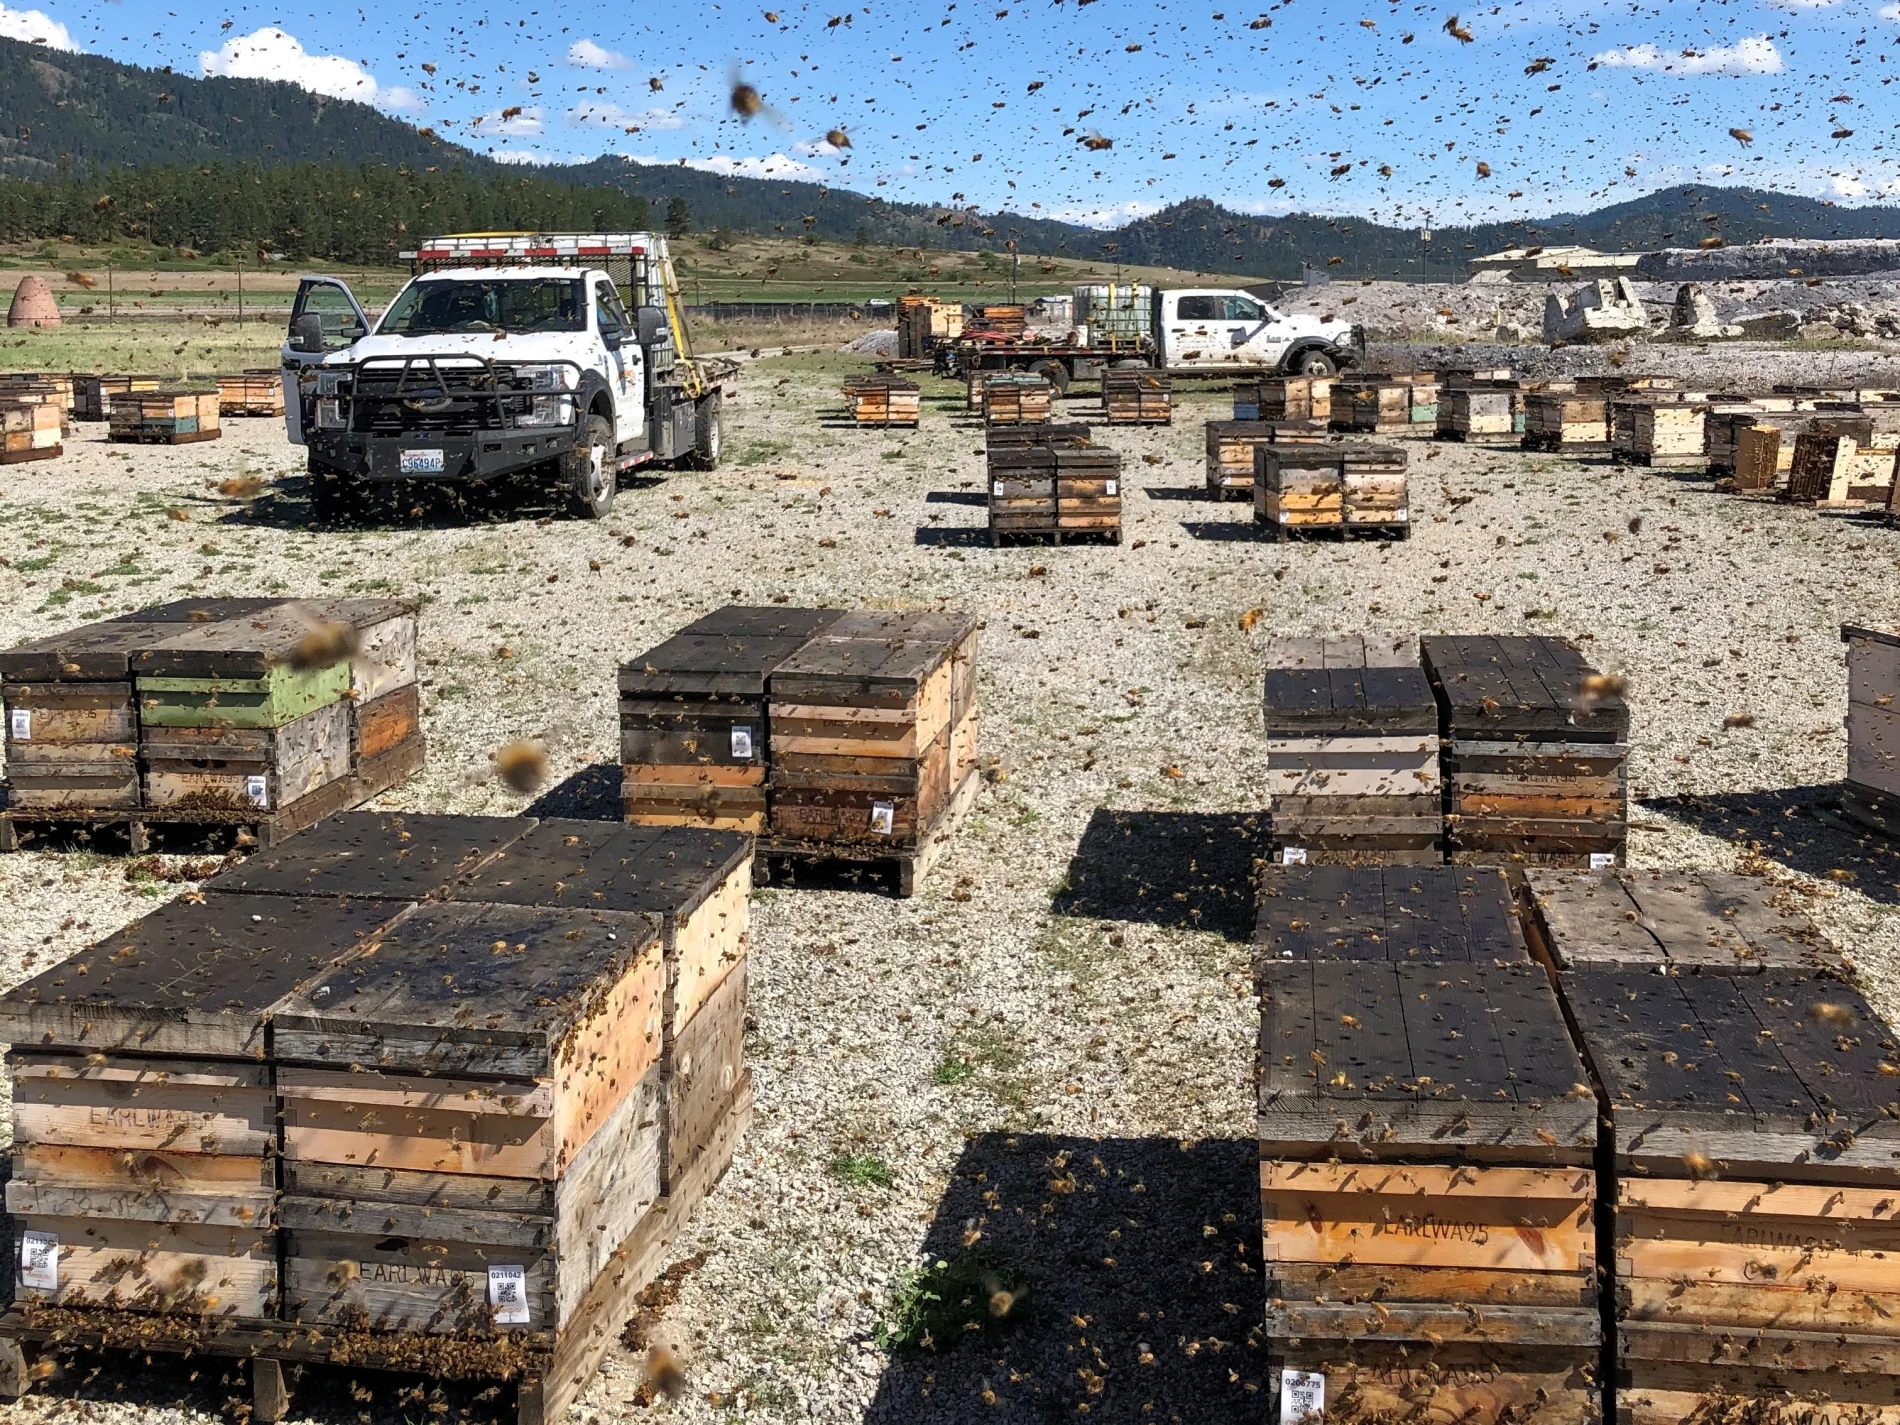 The Nectar platform monitoring bees and their wooden beehives in real-time